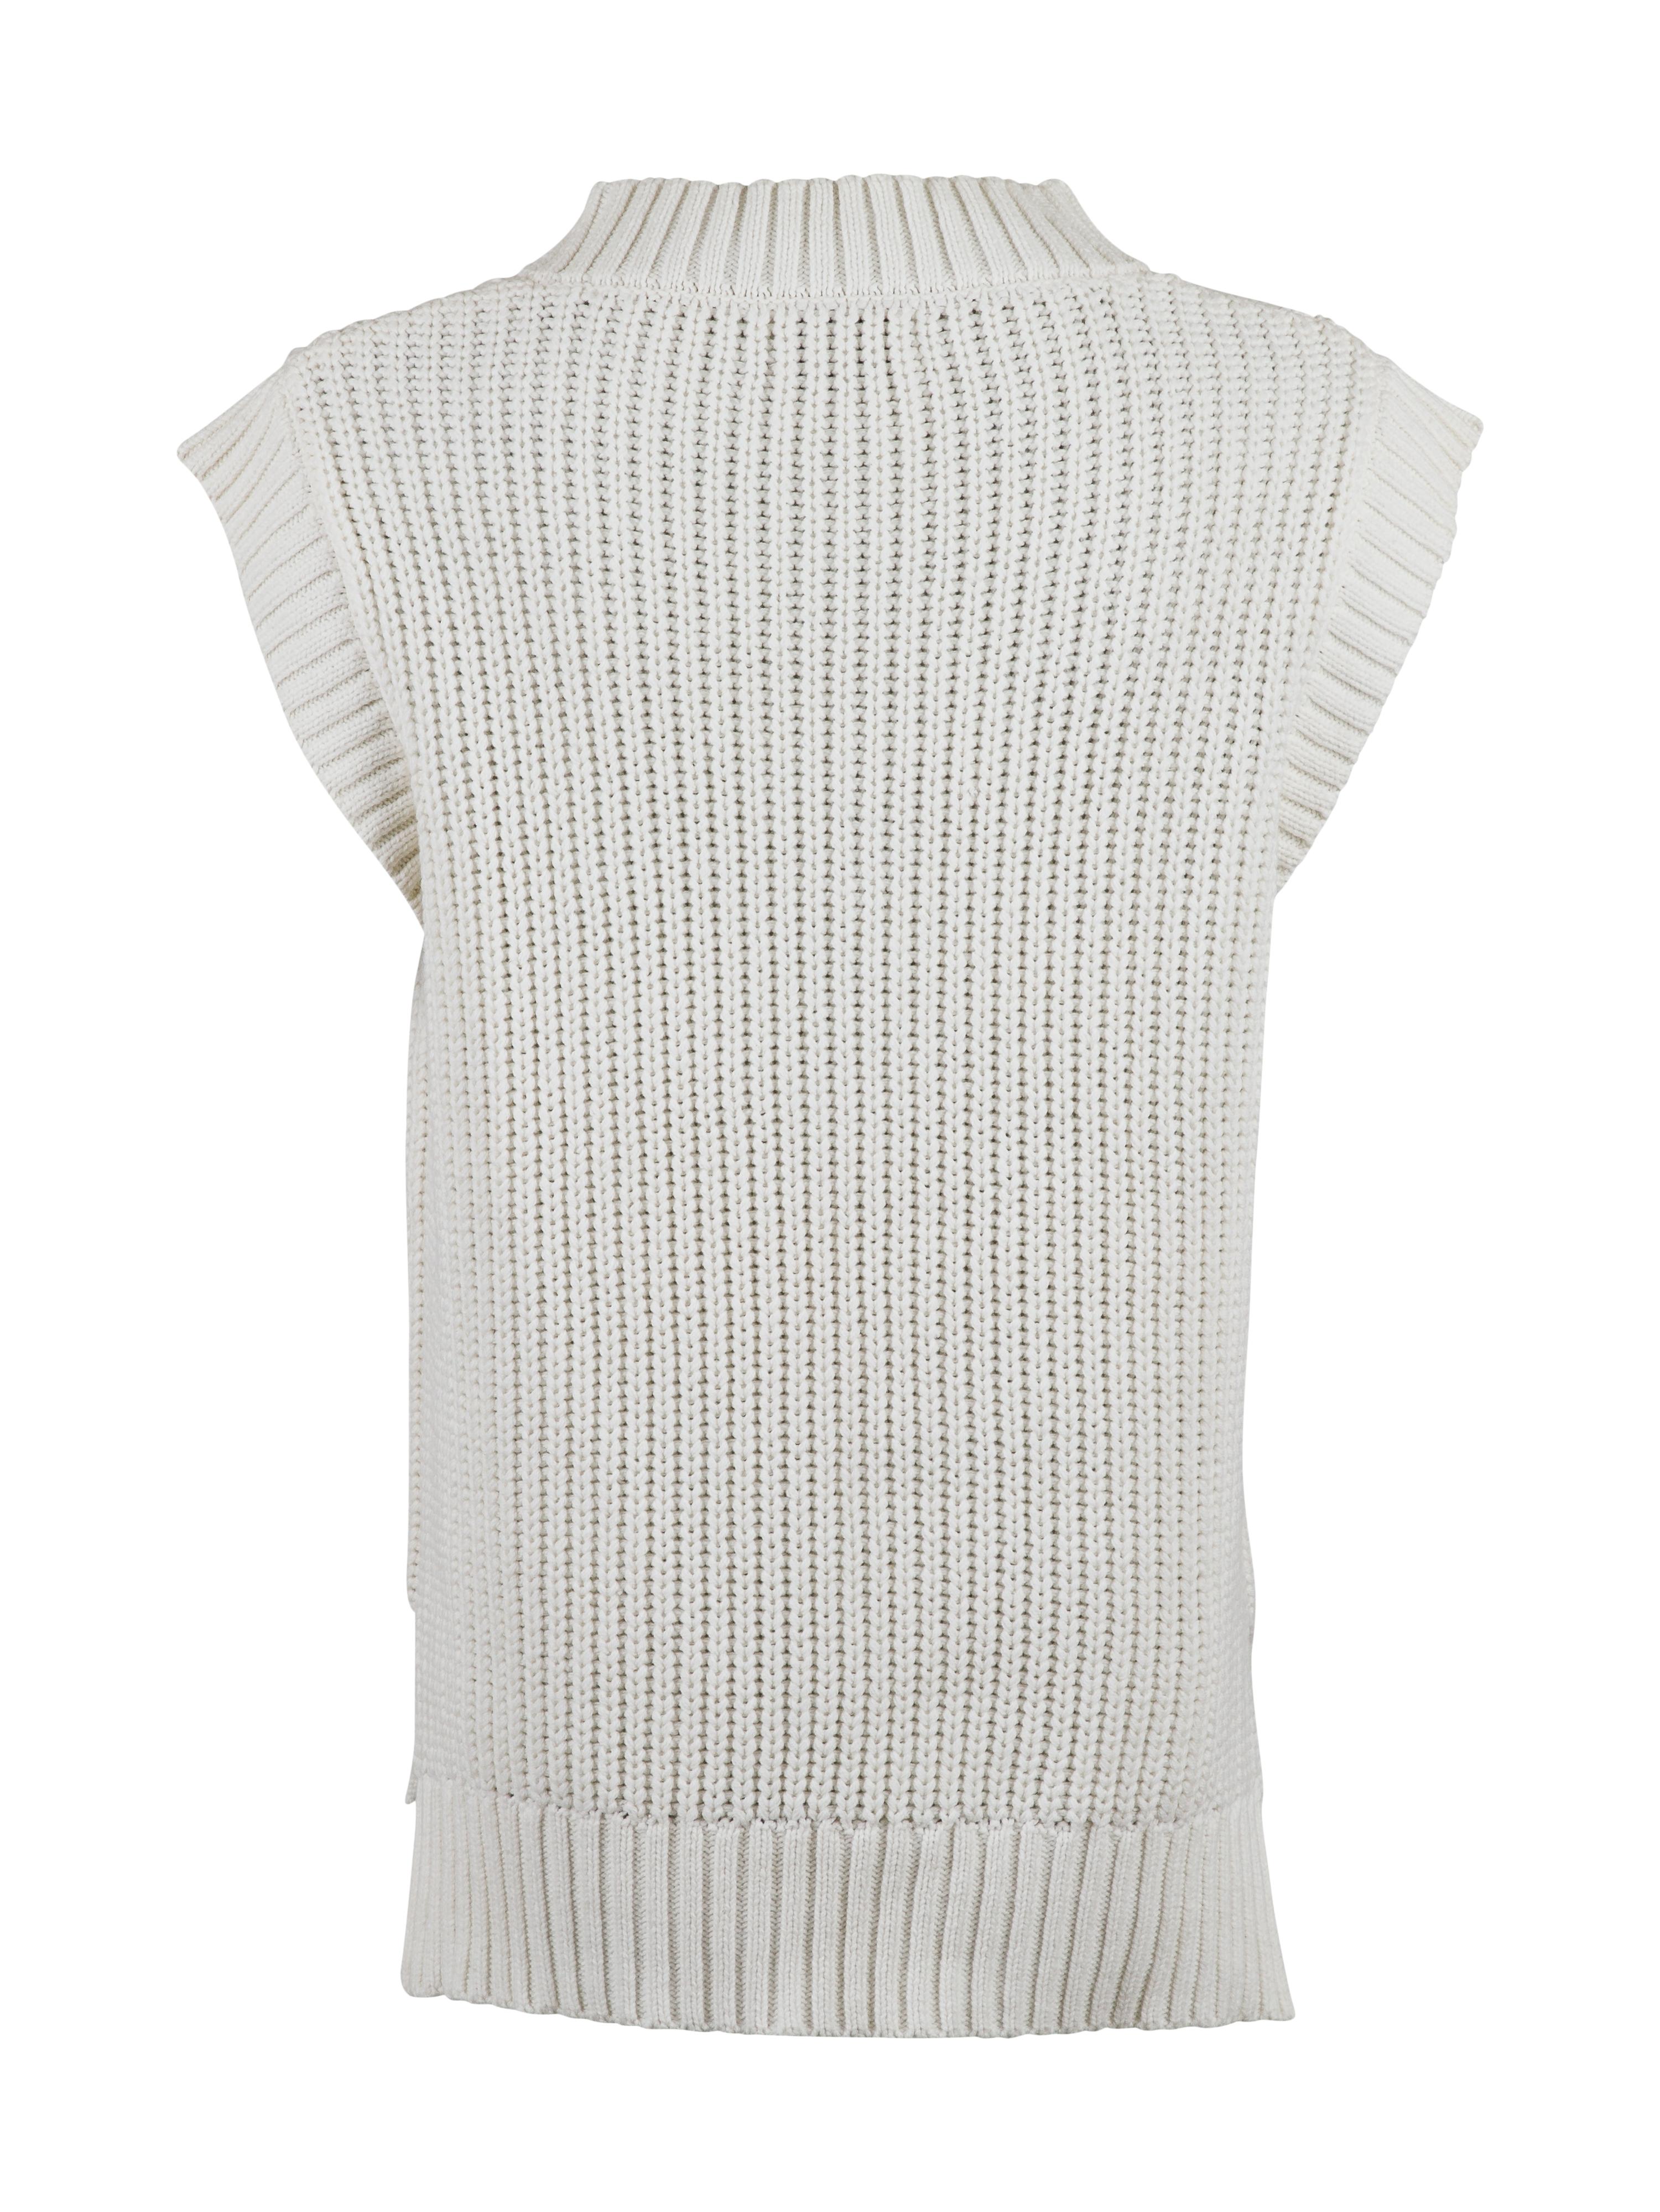 Kaylee Spring Knit Waistcoat - Off White